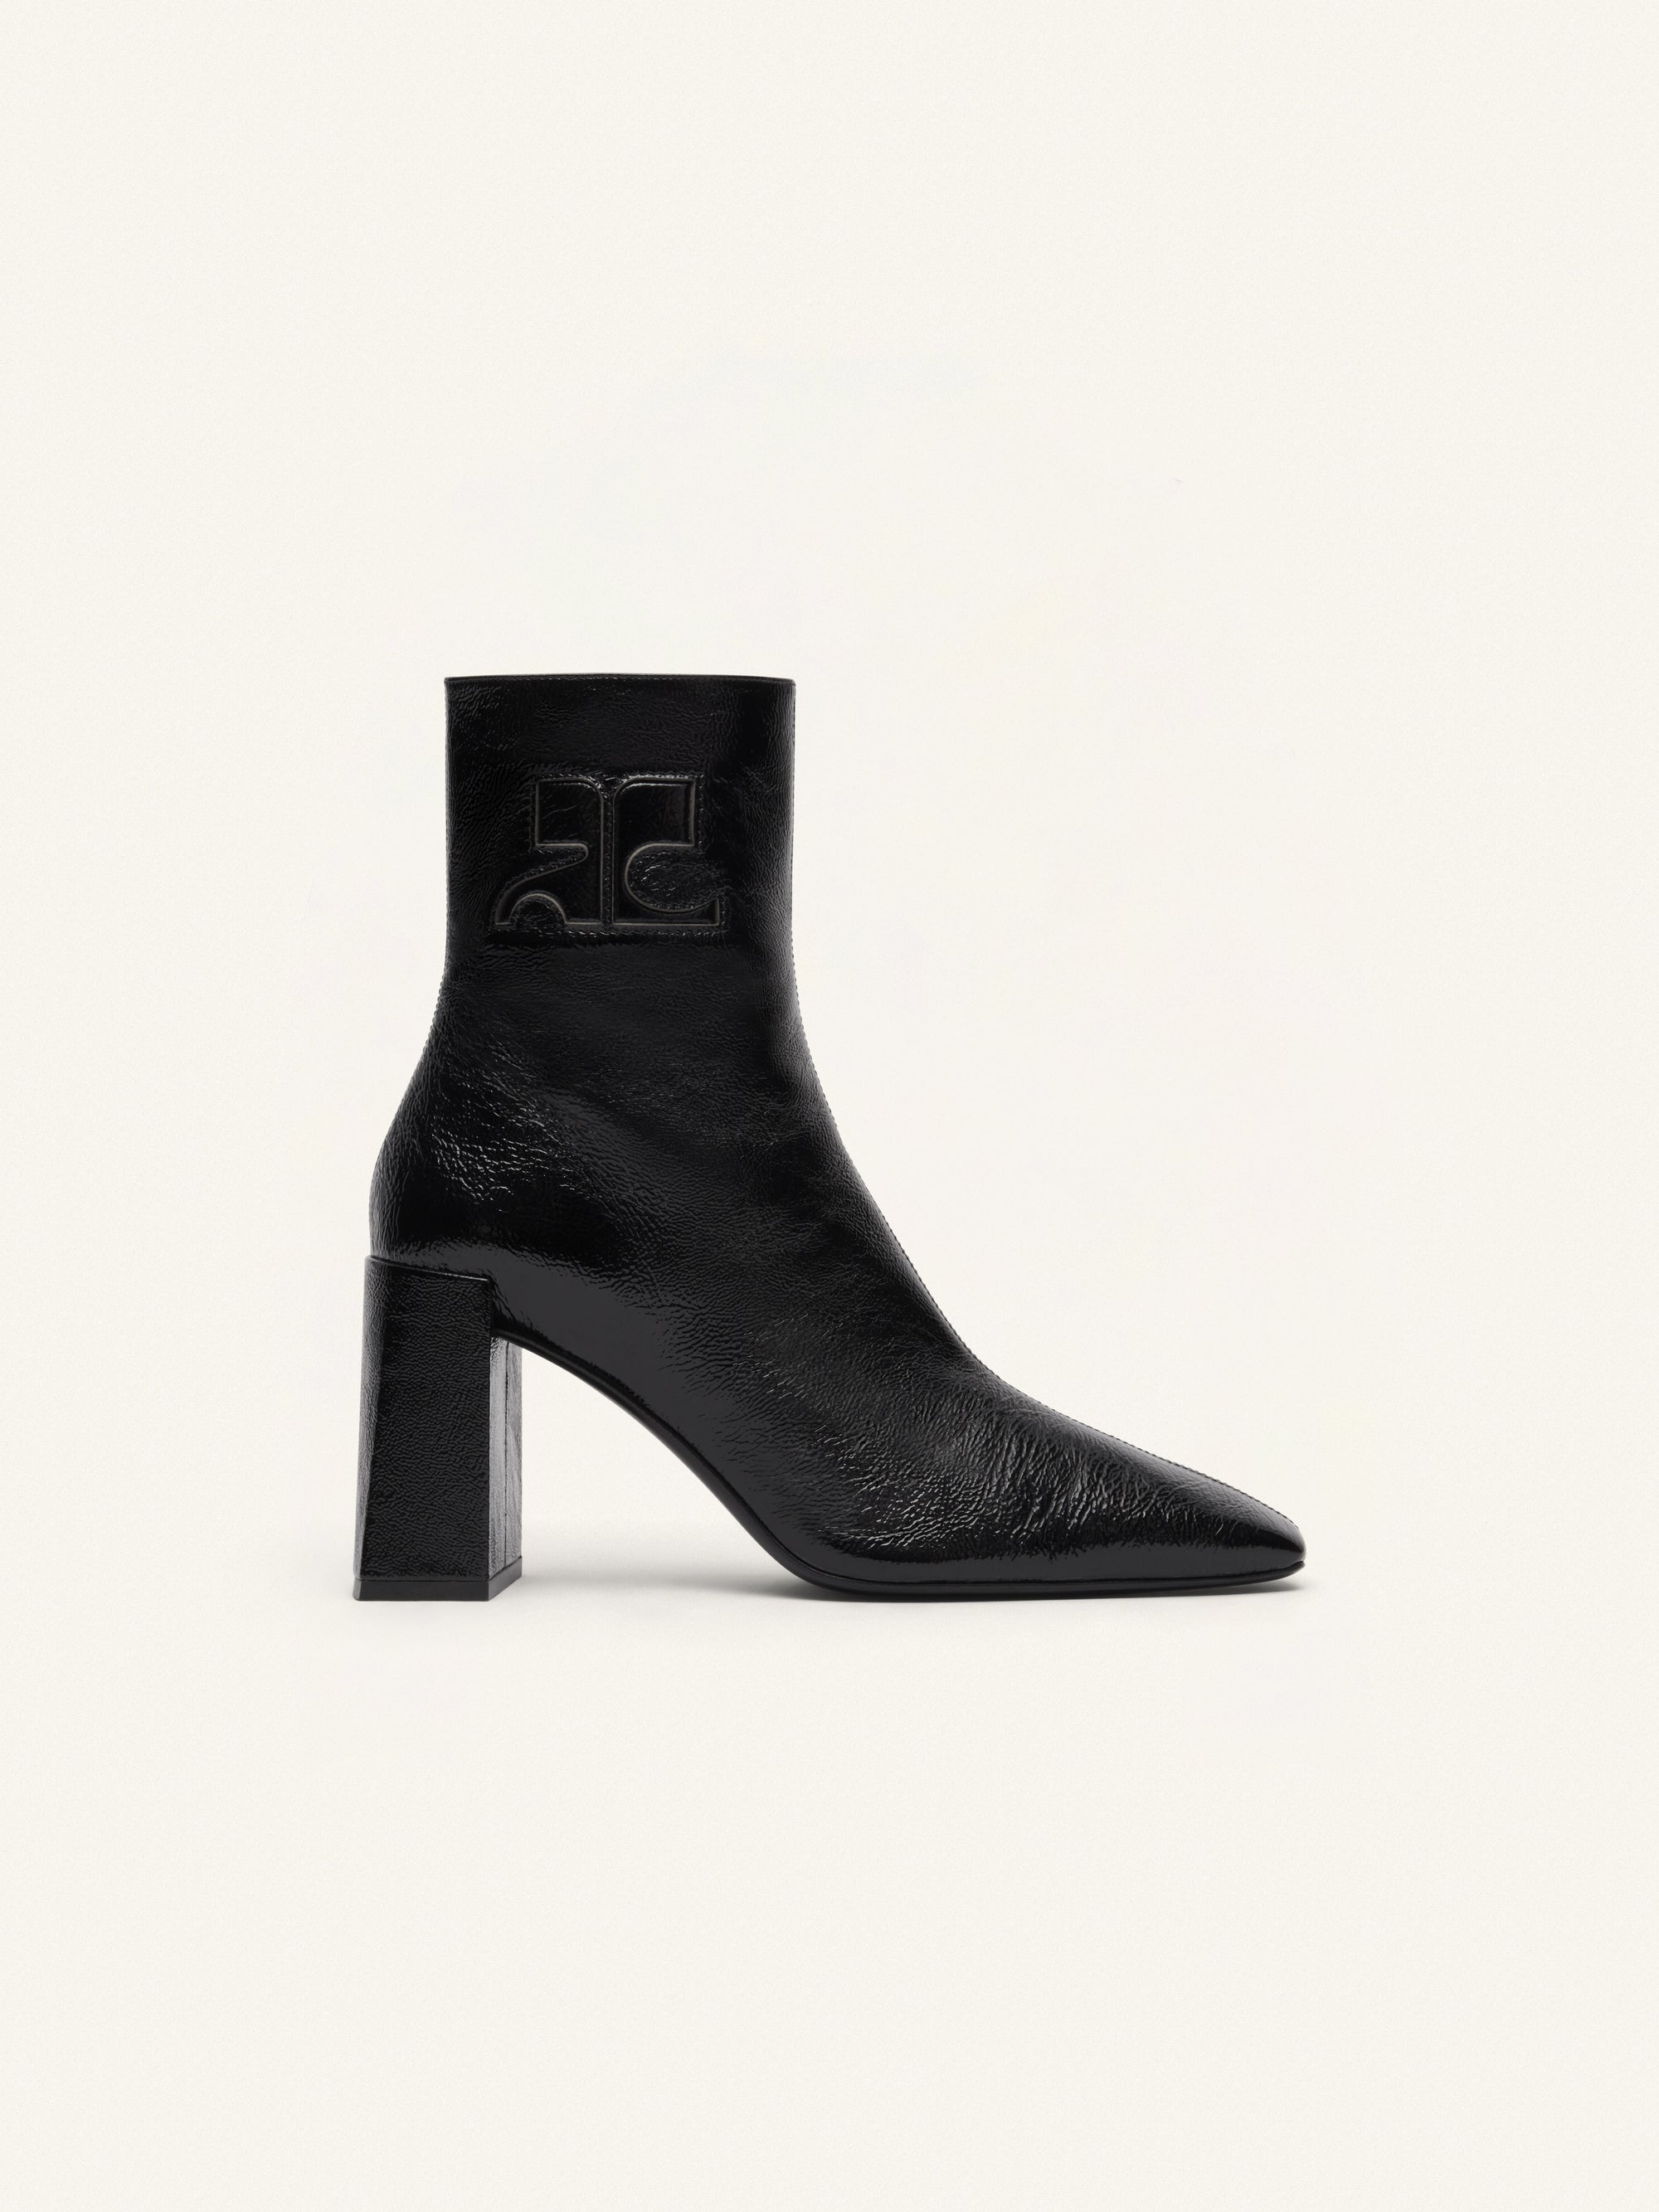 HERITAGE NAPLACK LEATHER ANKLE BOOTS